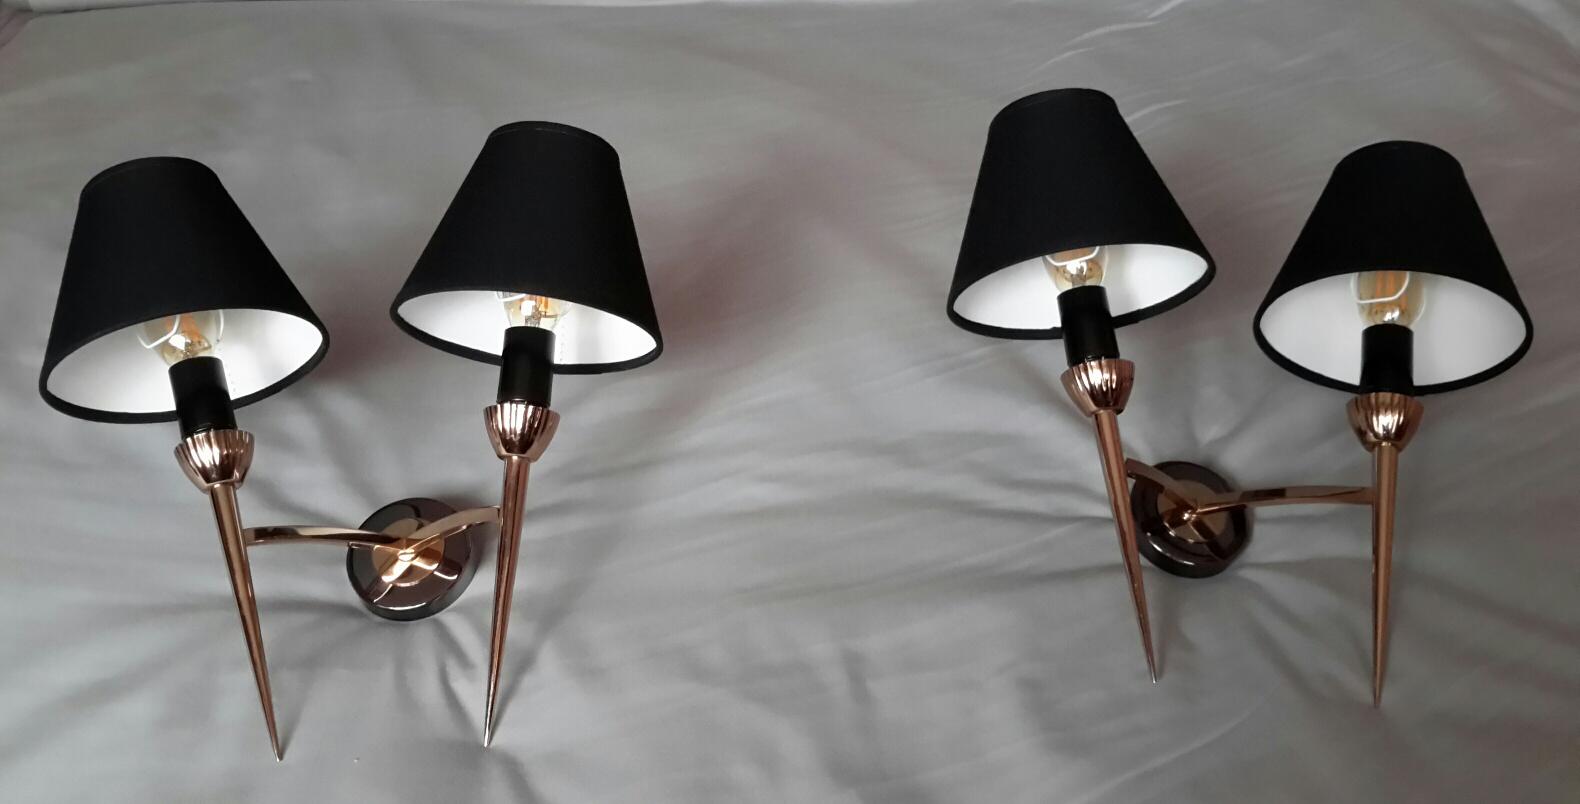 Pair of Neoclassical Sconces by Maison Lunel, France, 1950 For Sale 1